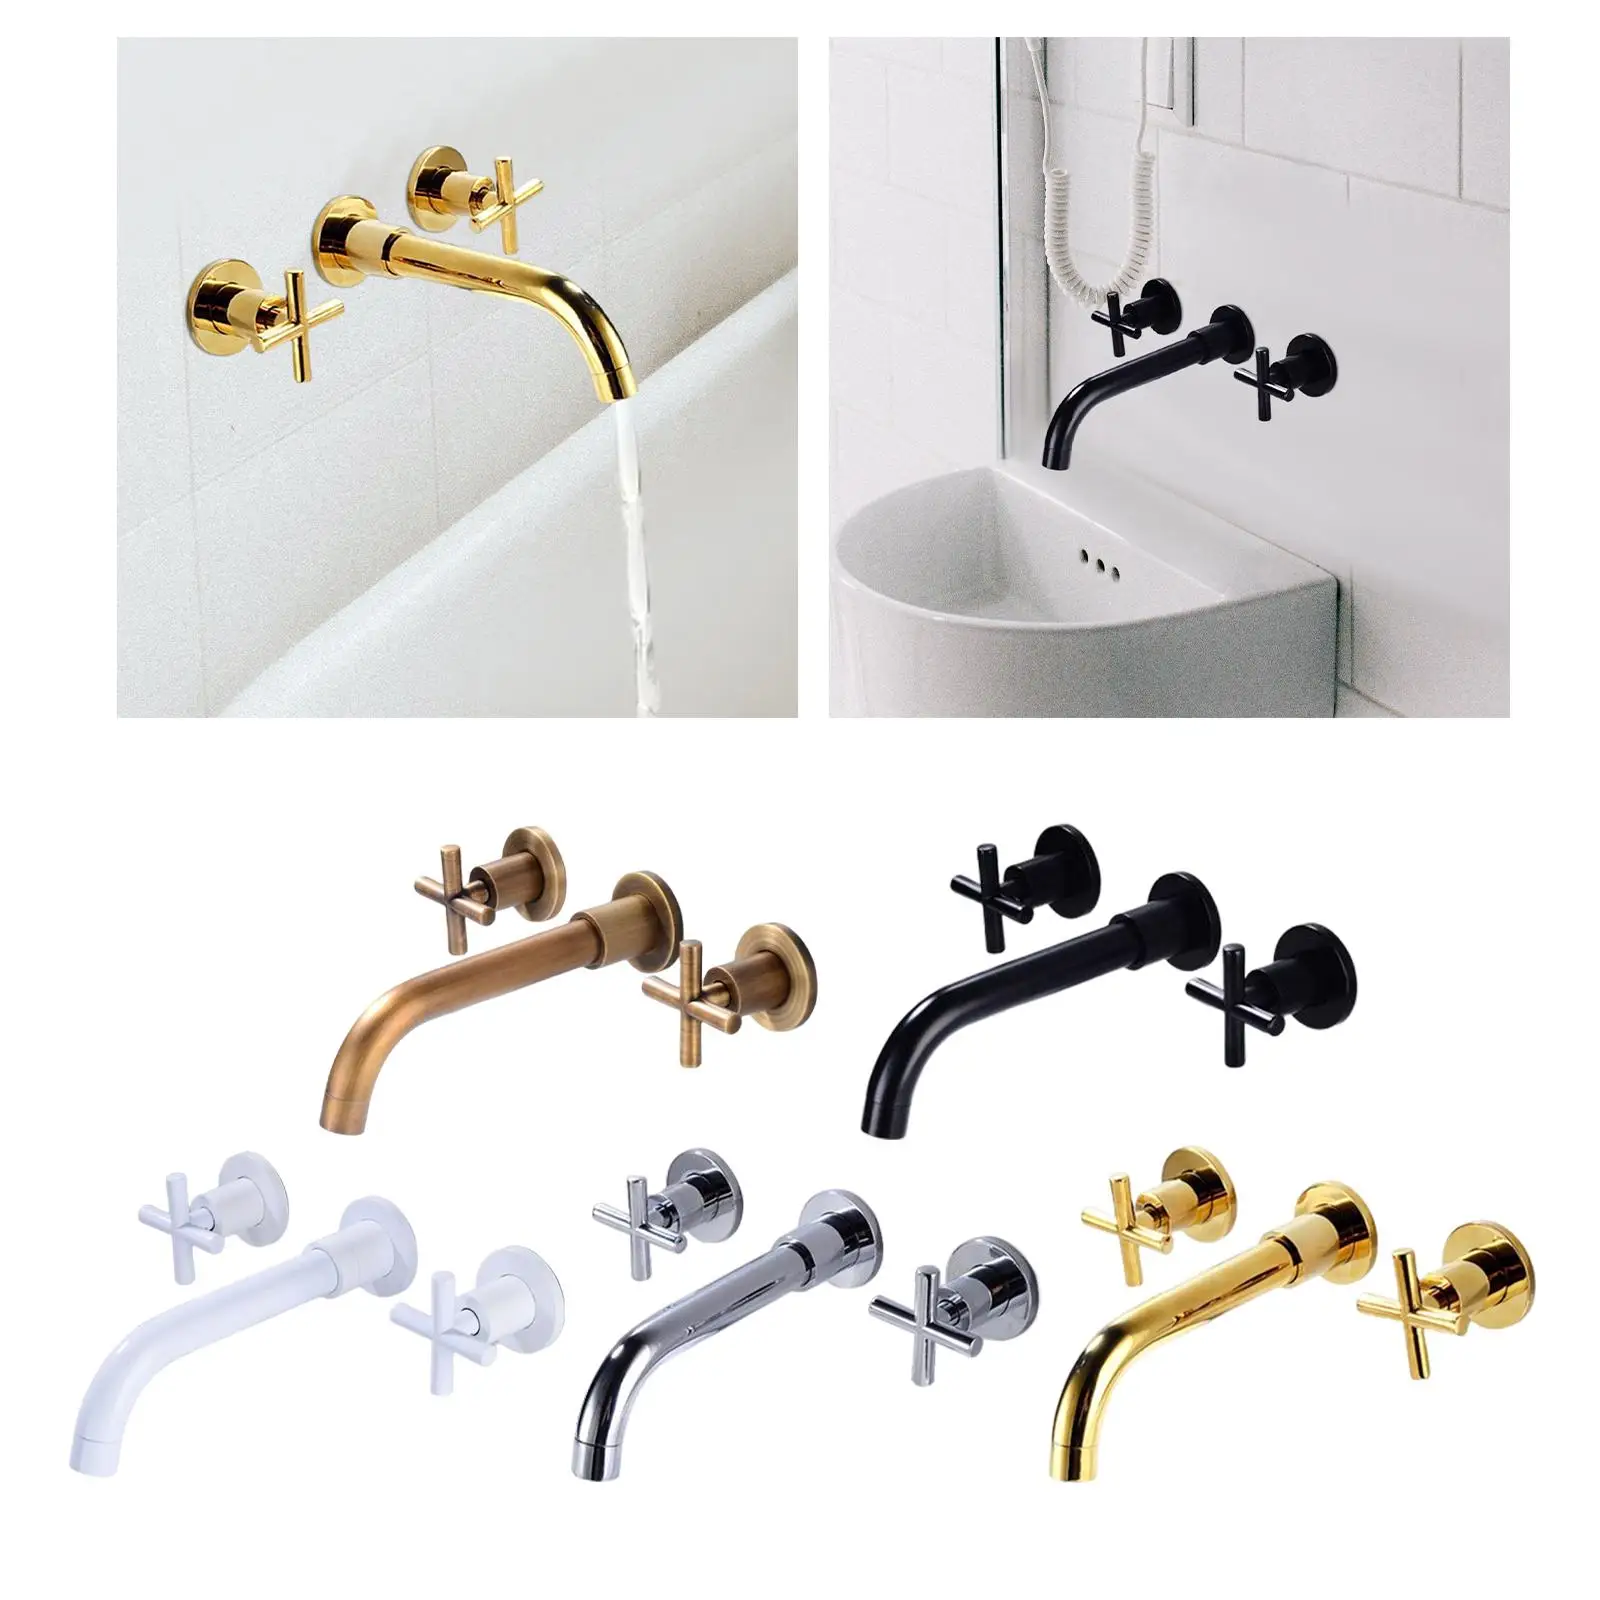 Wall Mounted Sink Tap 2 Handle Bathtub Hot and Cold Faucet Mixer Tap